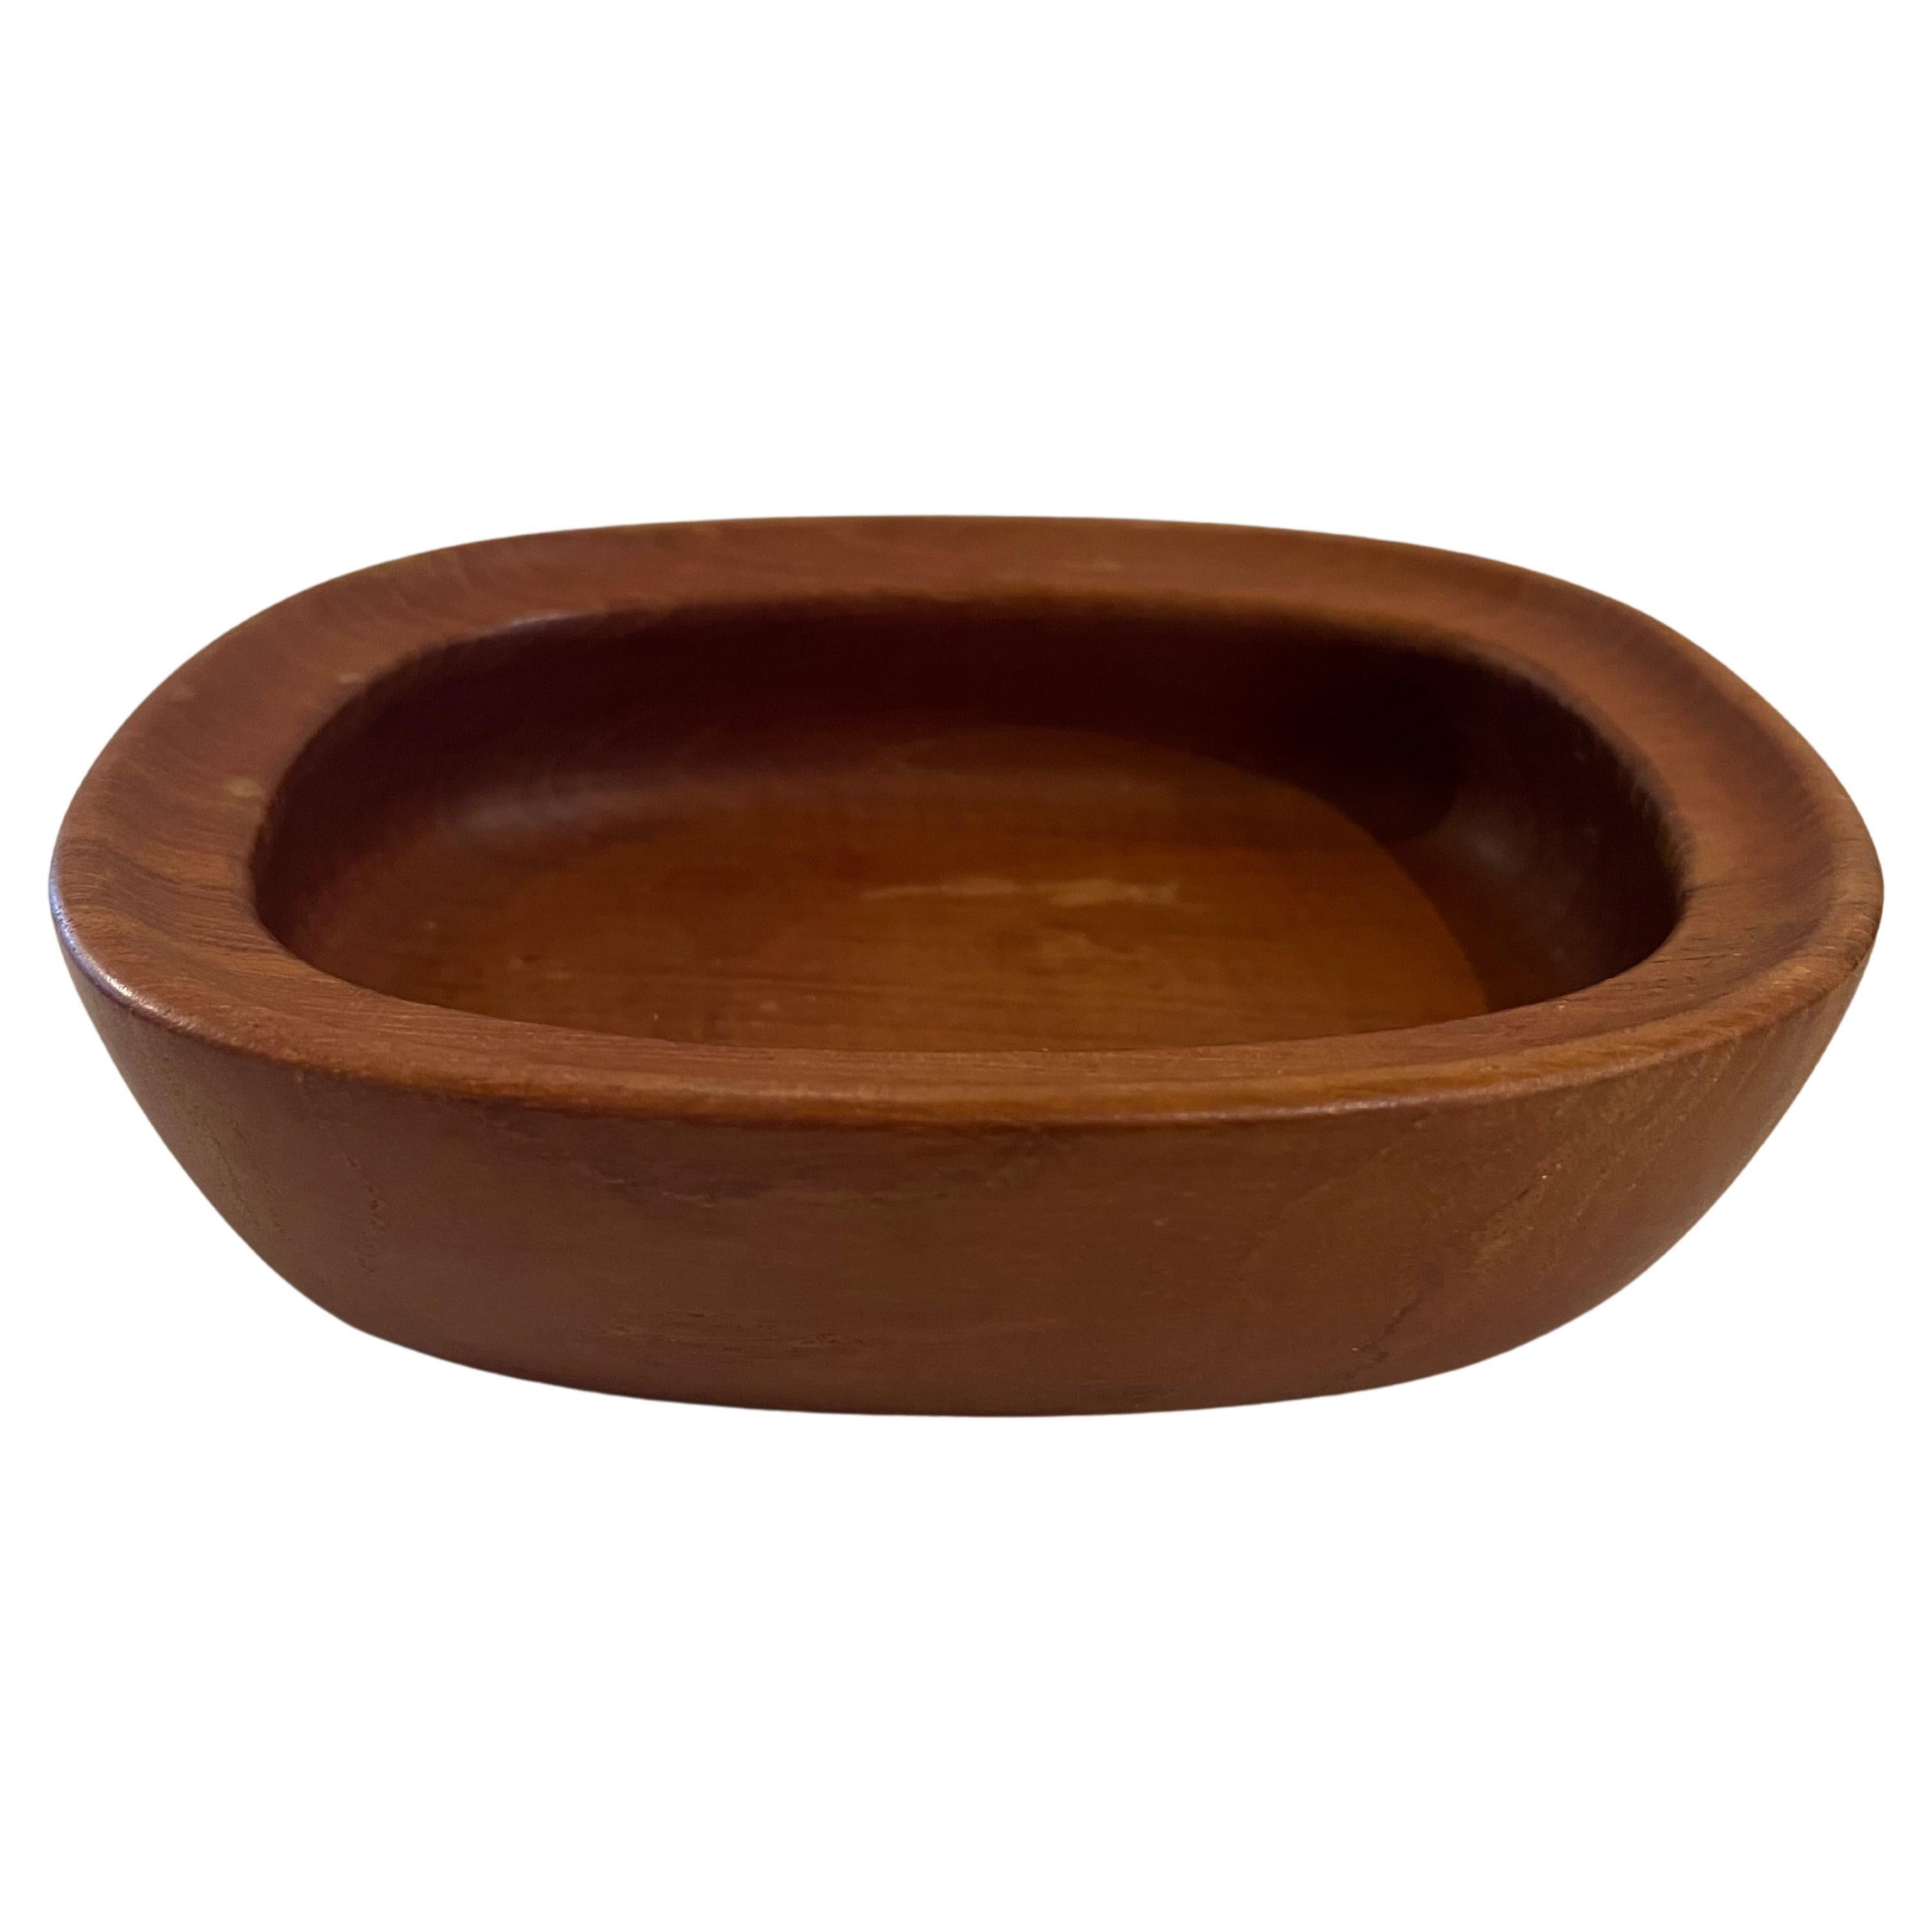 Petite Solid Teak rare Danish Modern Catch It All Bowl By Nissen For Sale